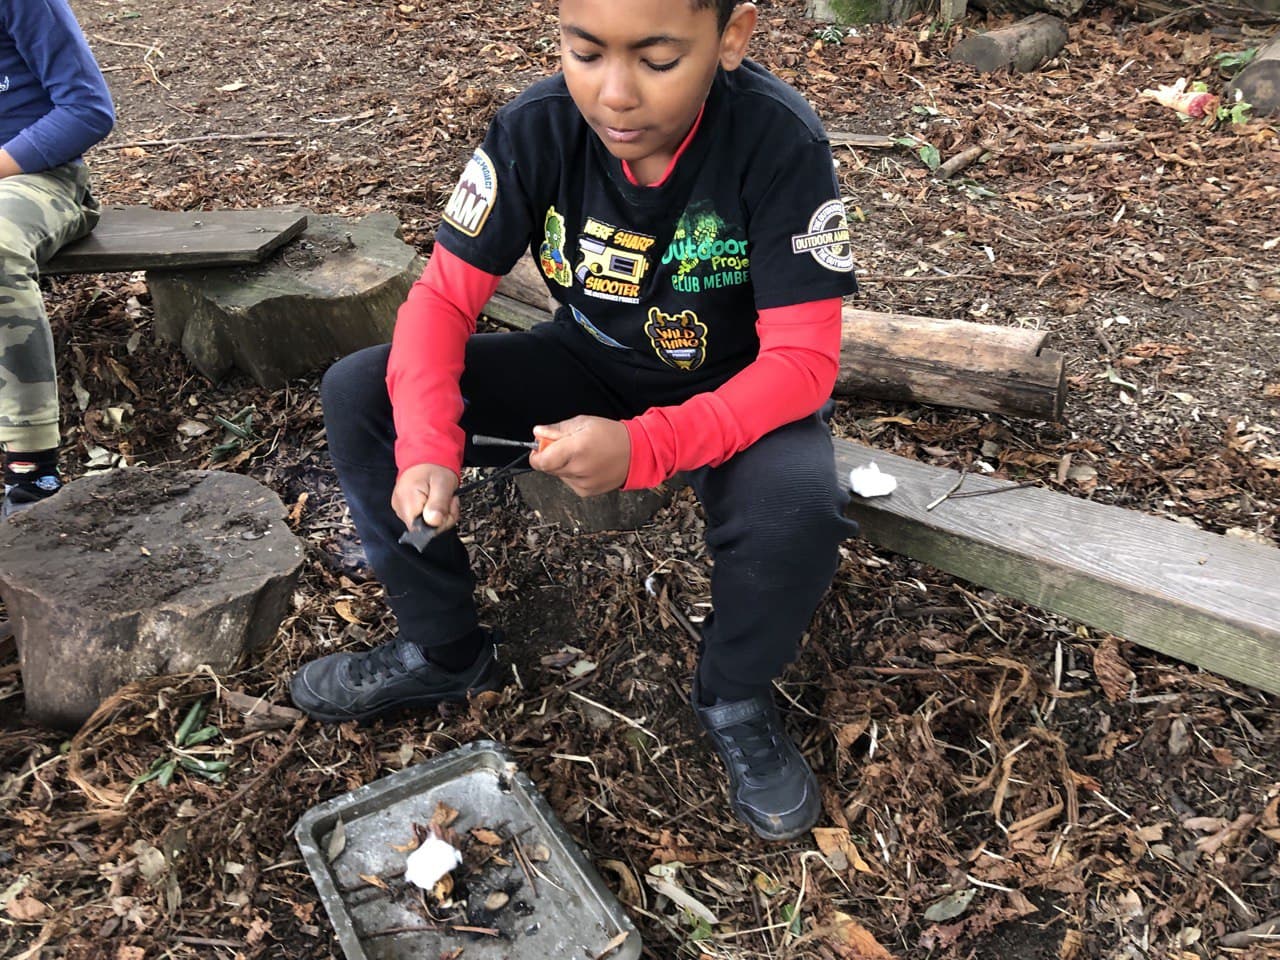 Teaching kids about fire safety & its history - The Outdoors Project